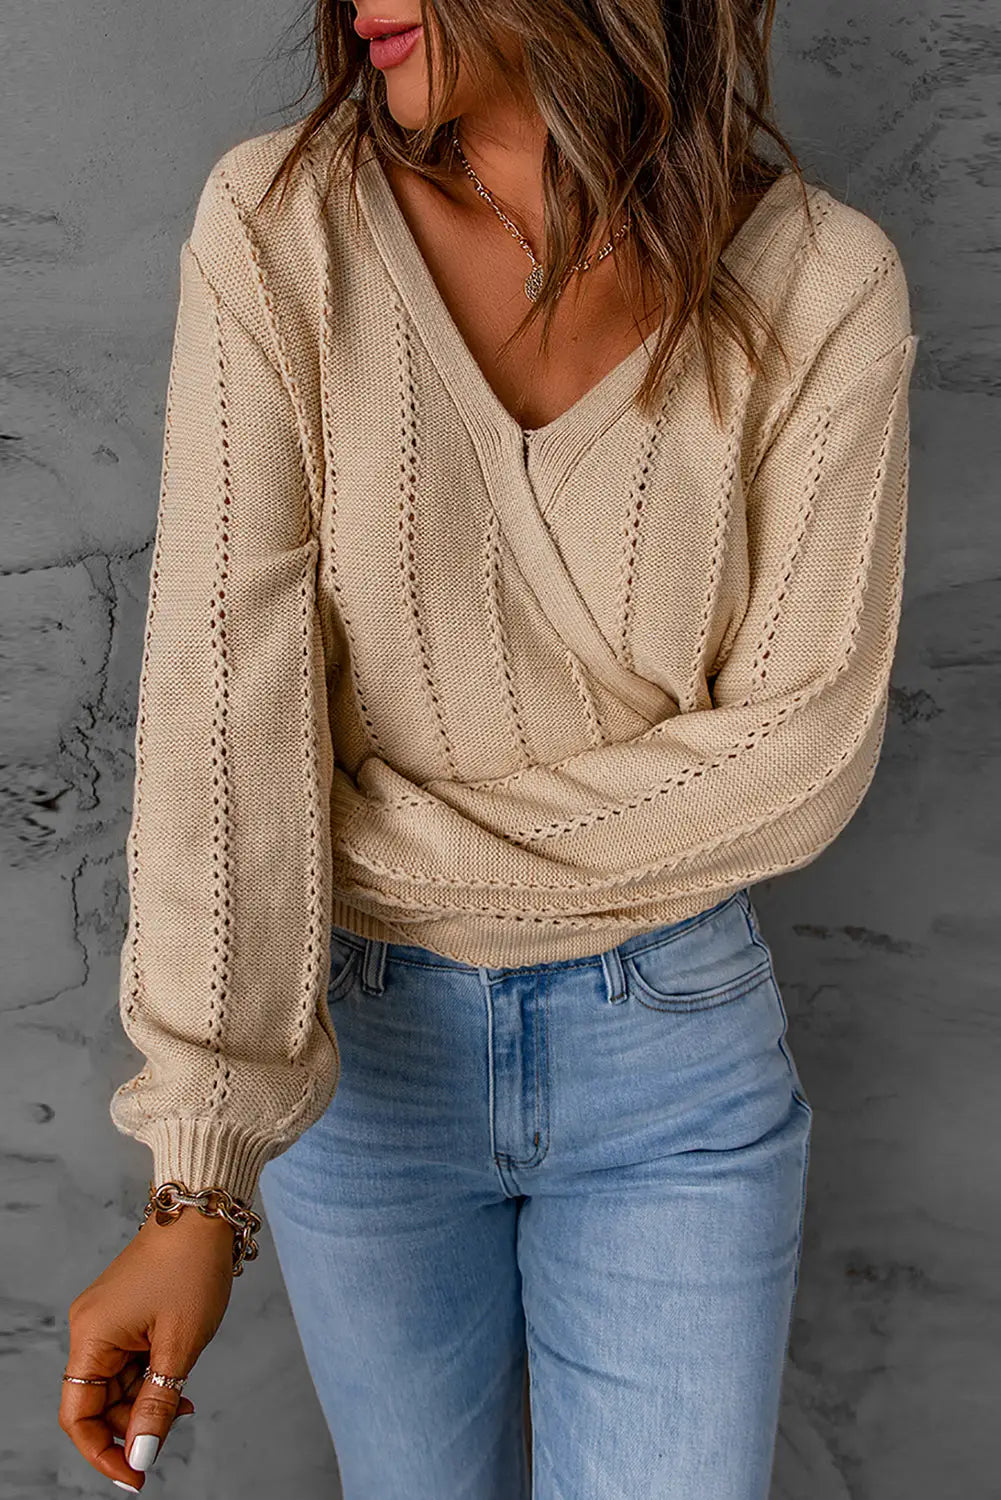 Apricot hollow out v neck pullover sweater - s /